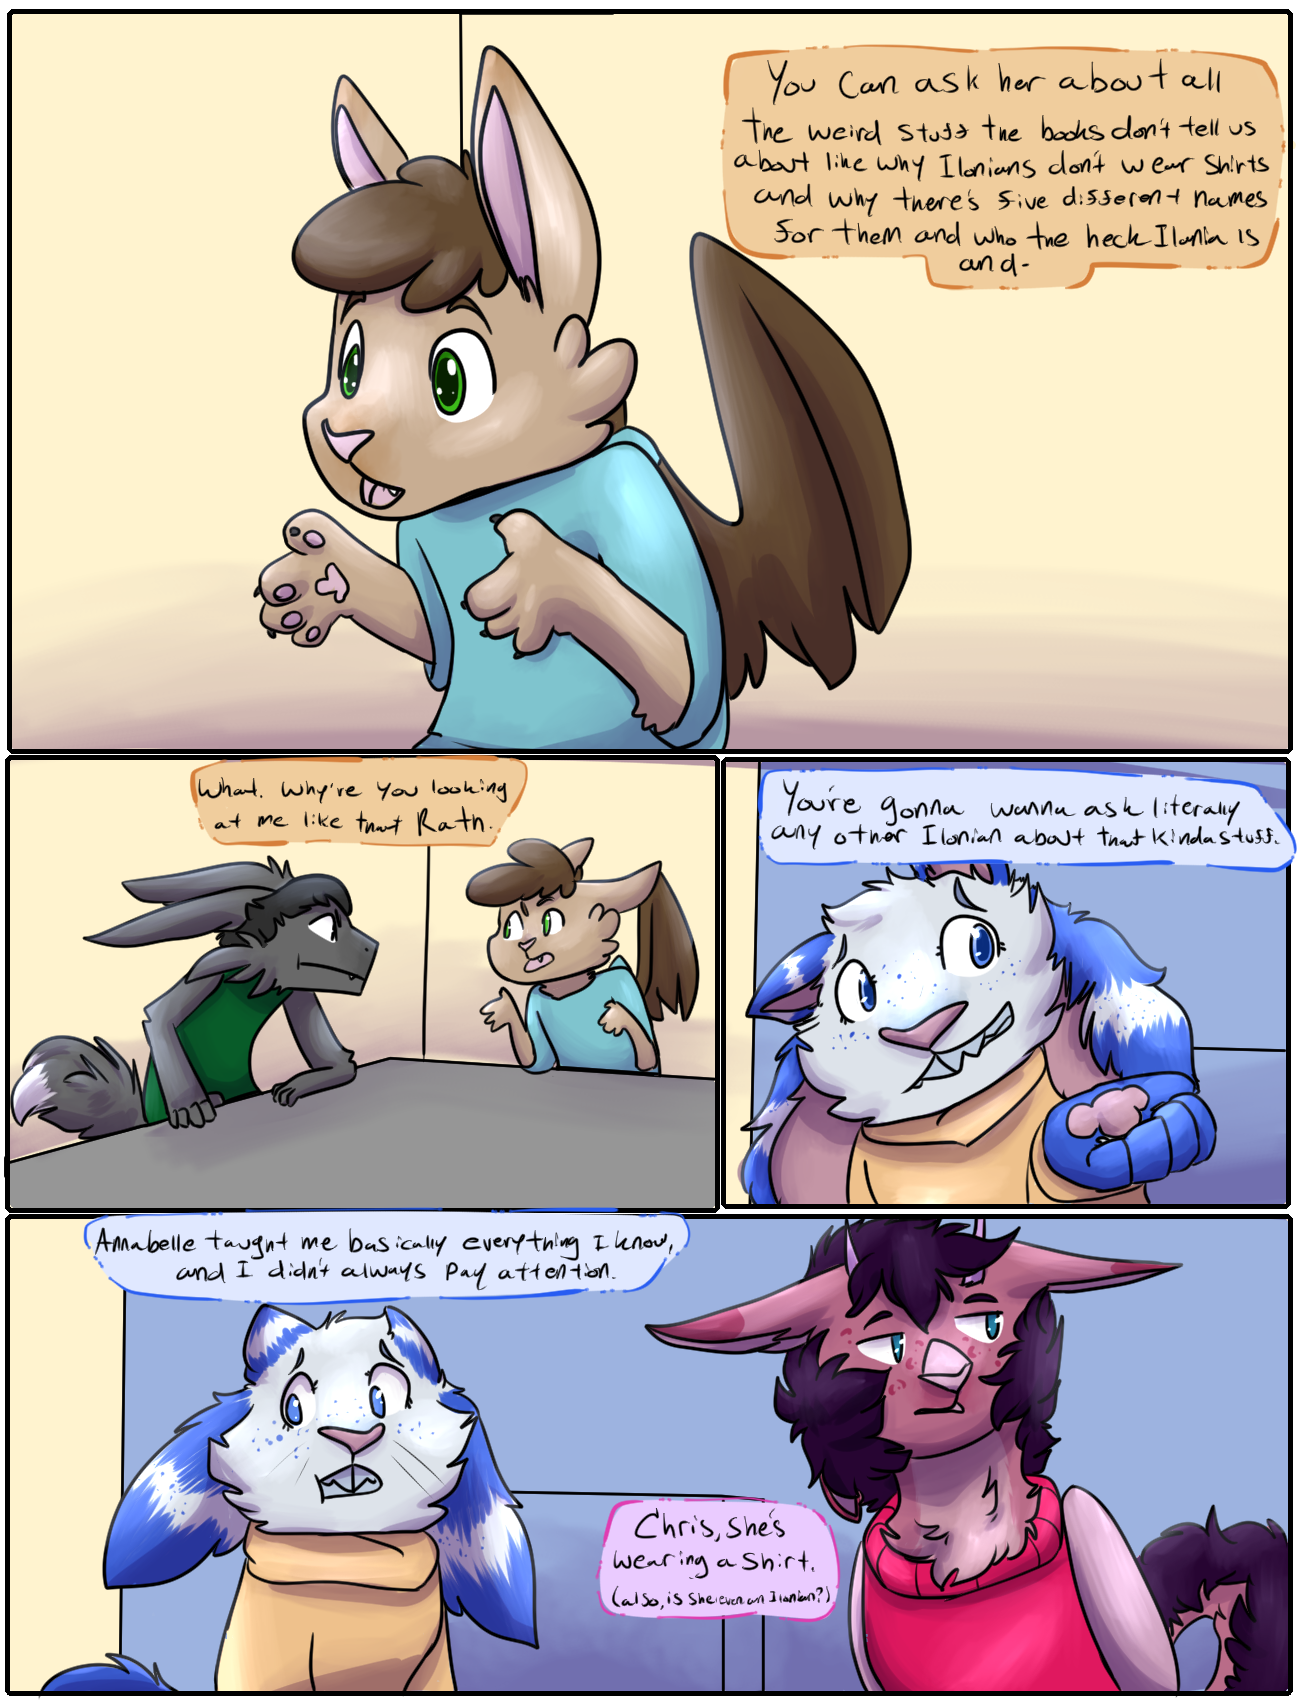 page 91 - Ask that weird stuff